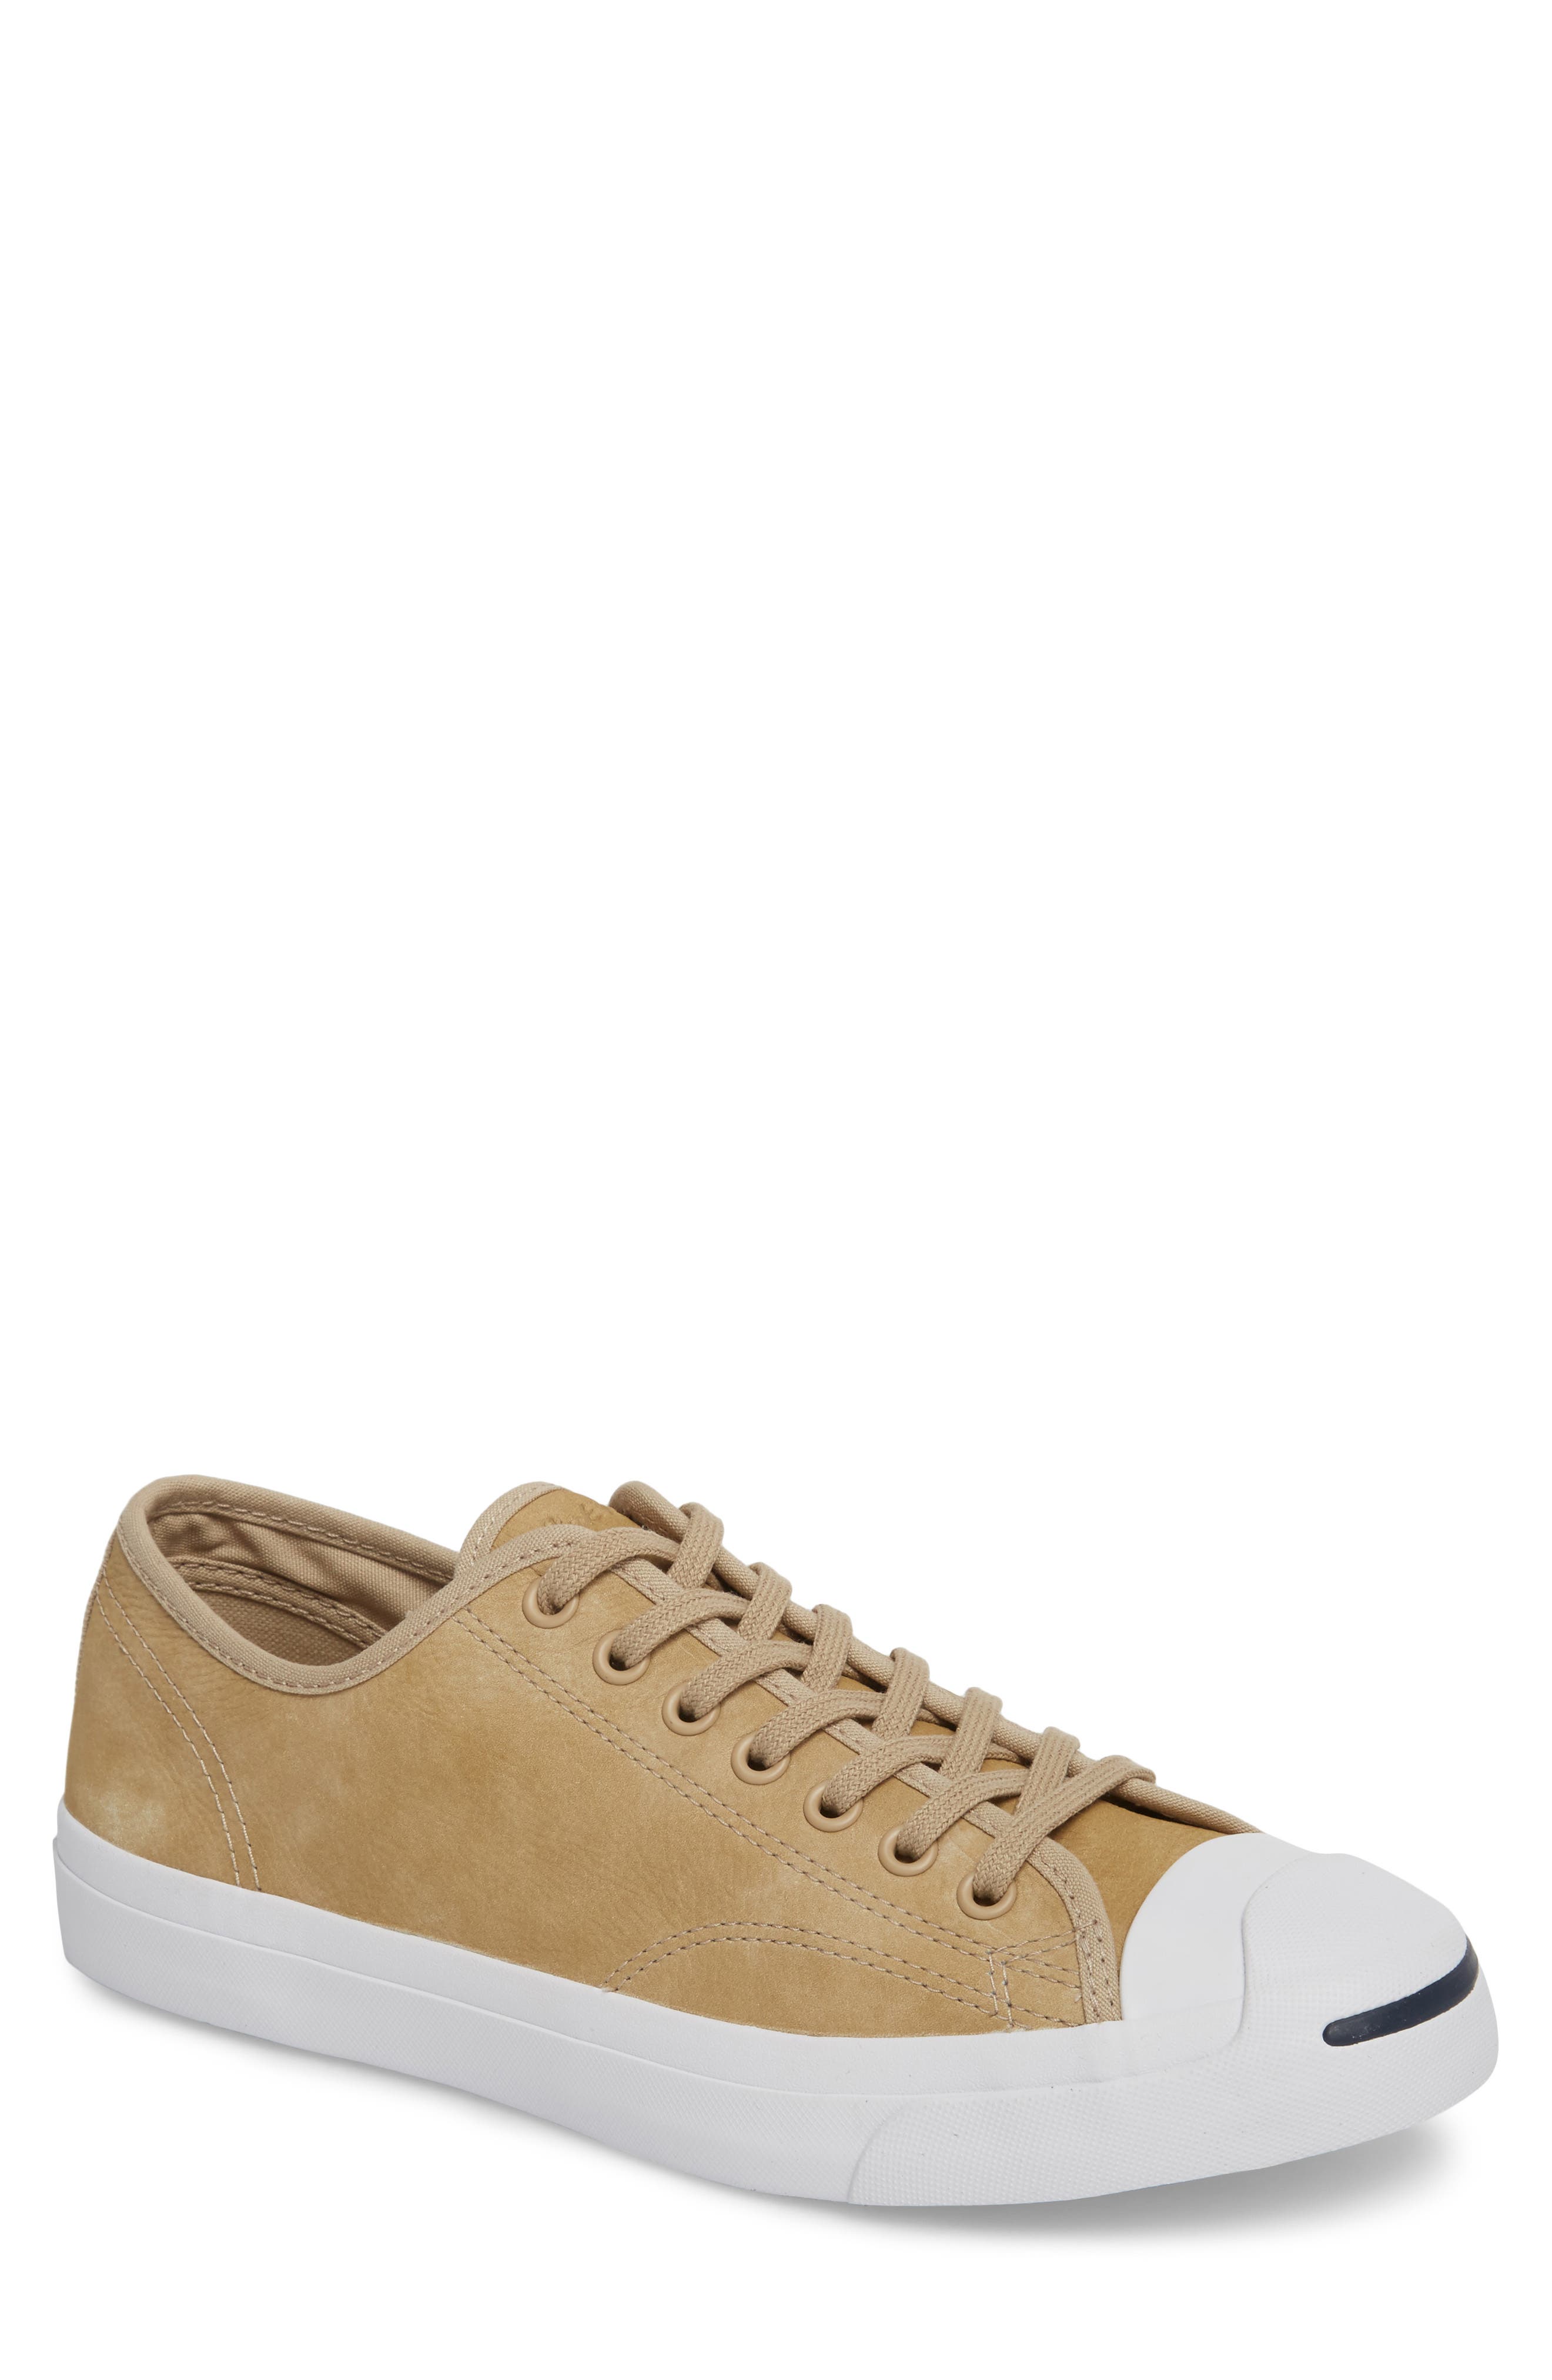 converse jack purcell brown